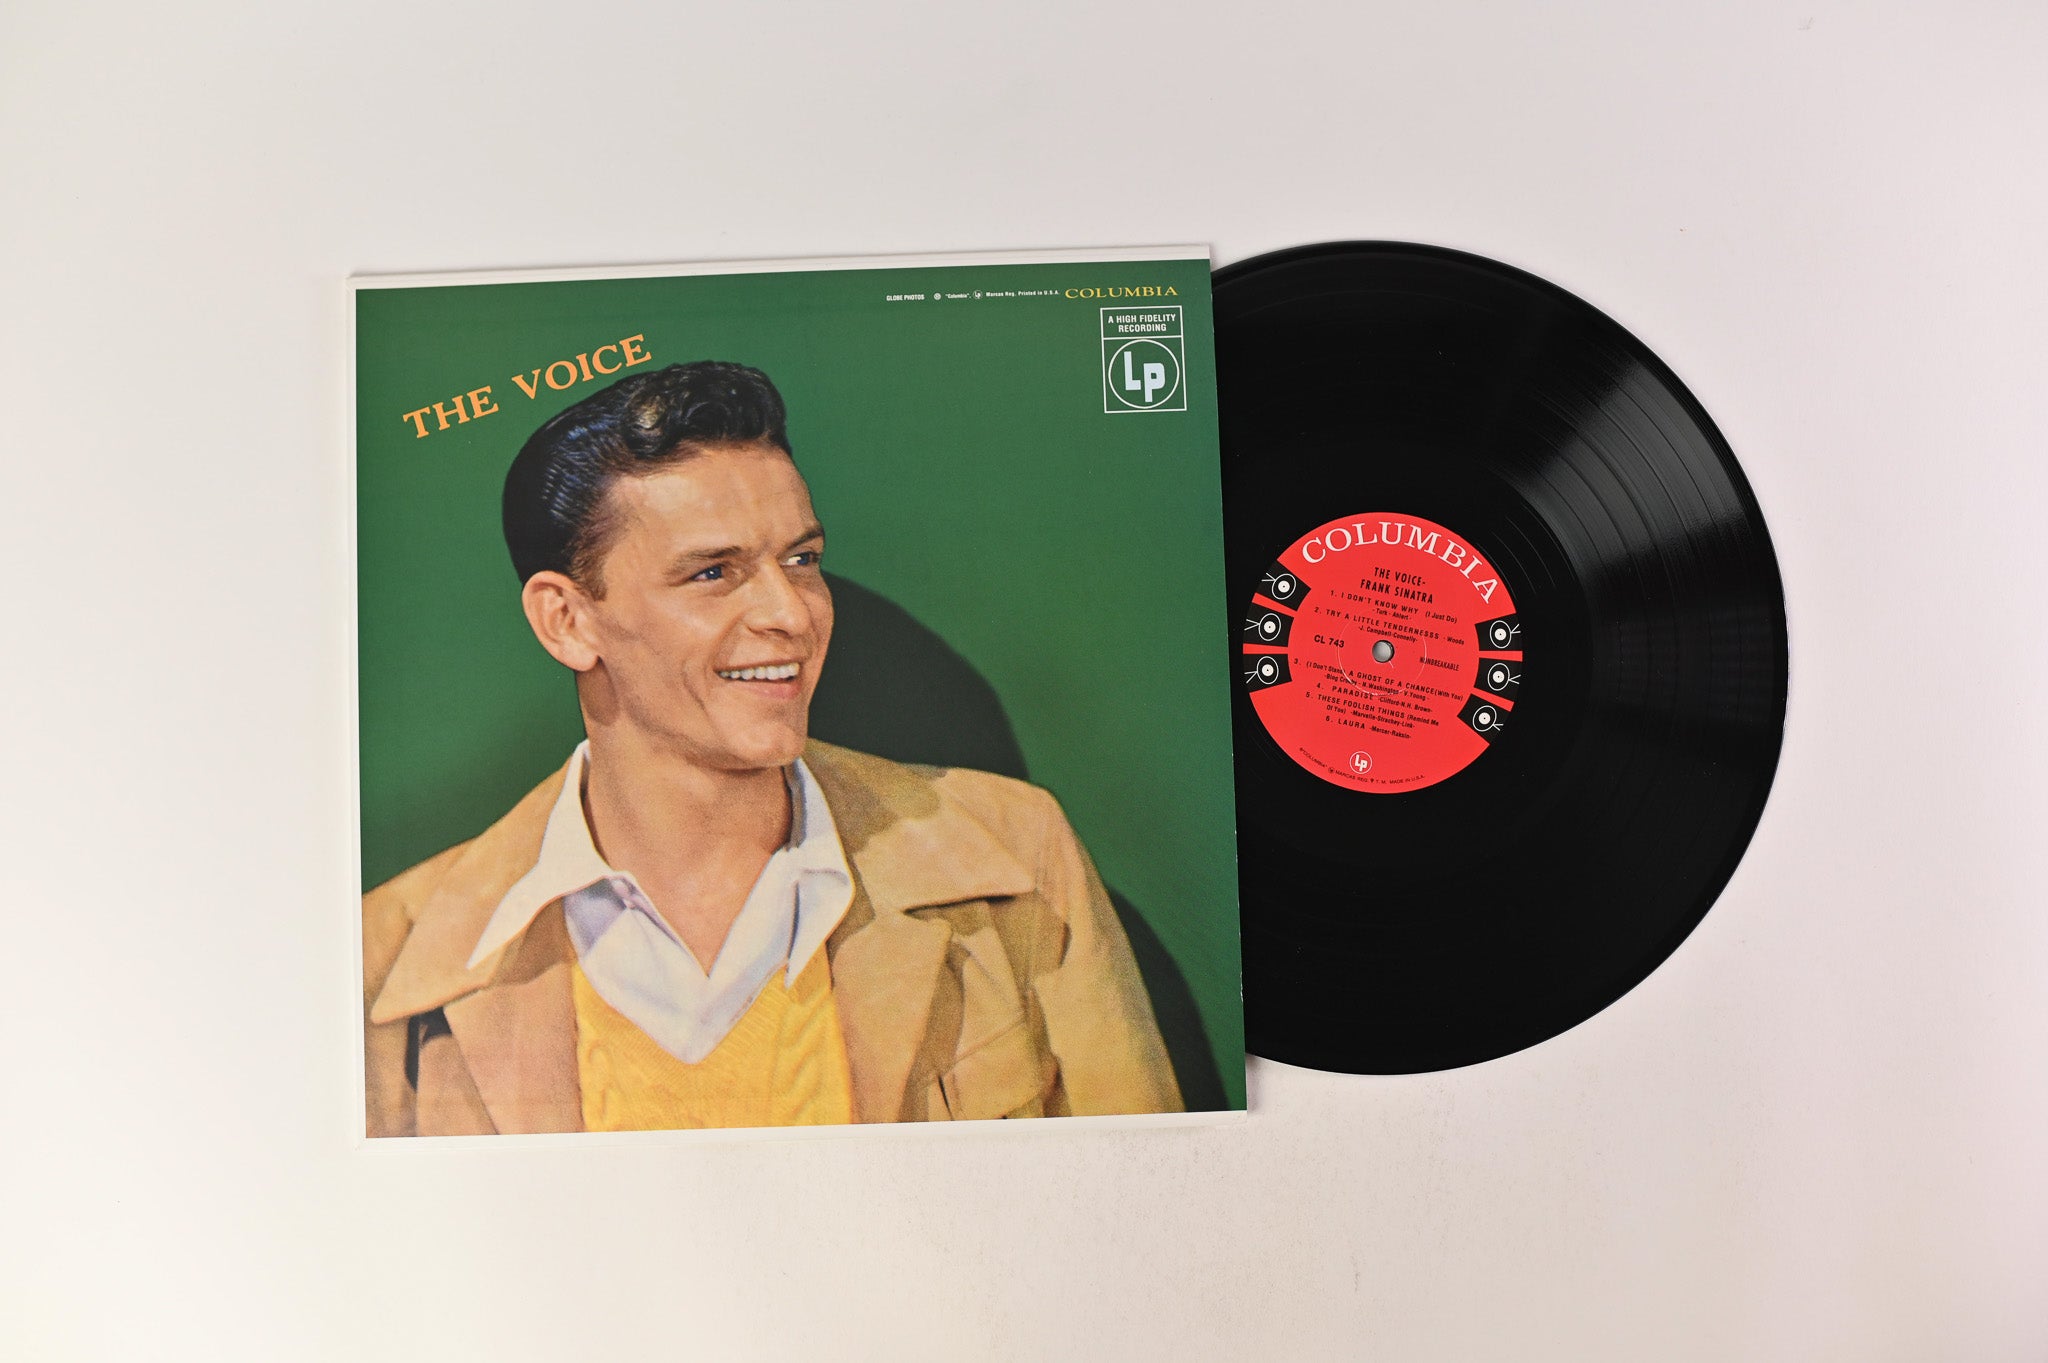 Frank Sinatra - The Voice on Classic Records